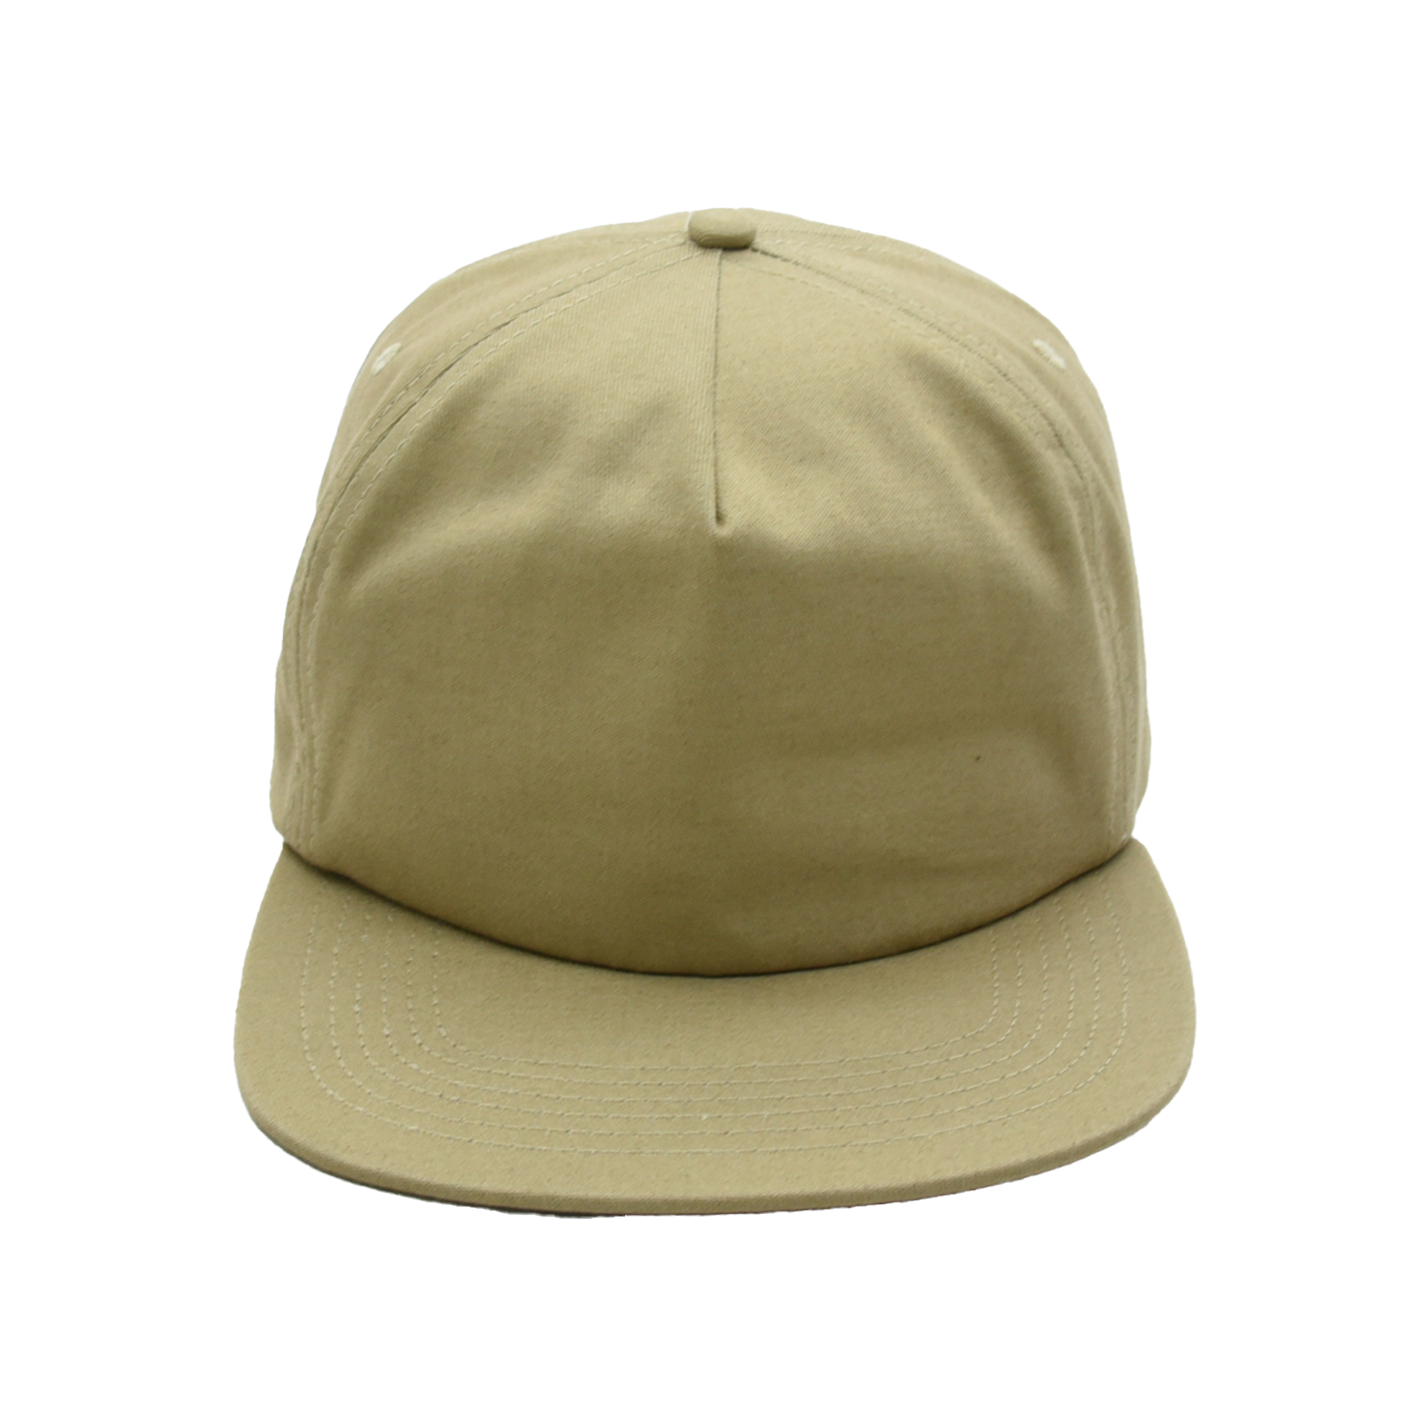 Khaki 5-Panel Cotton Snapback Hat Blank - Front view only